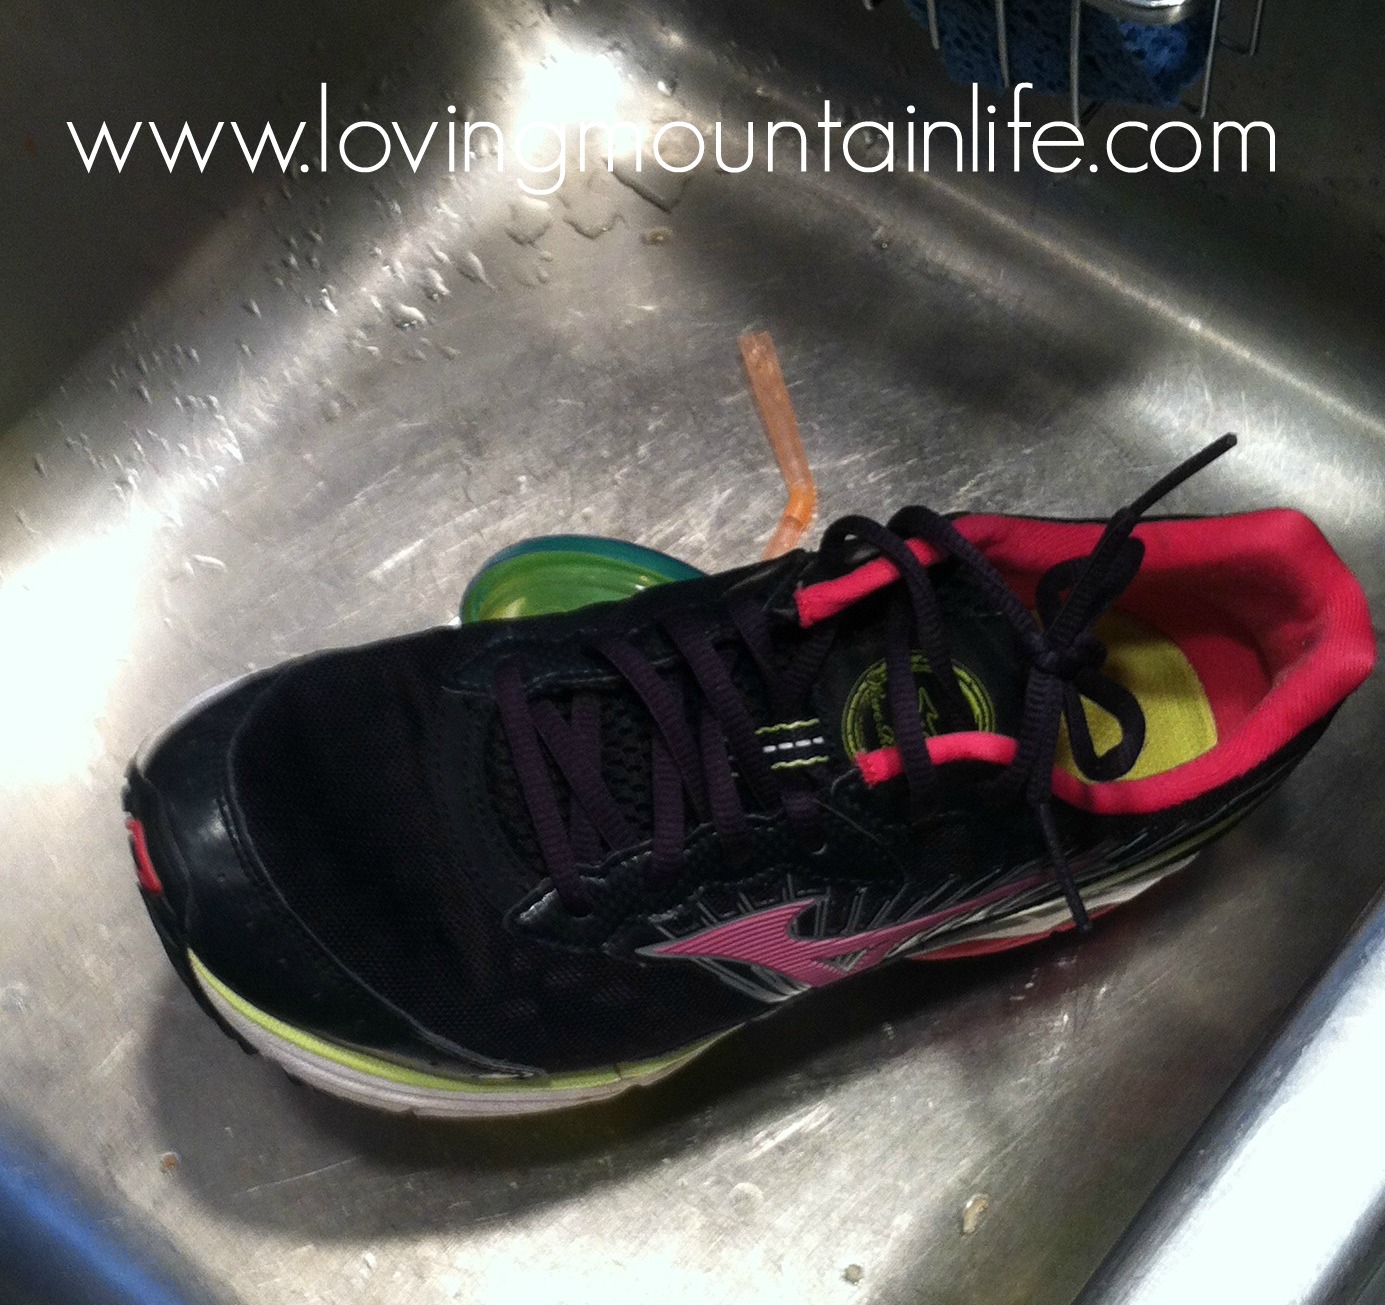 Shoe in the Sink | Loving Mountain Life